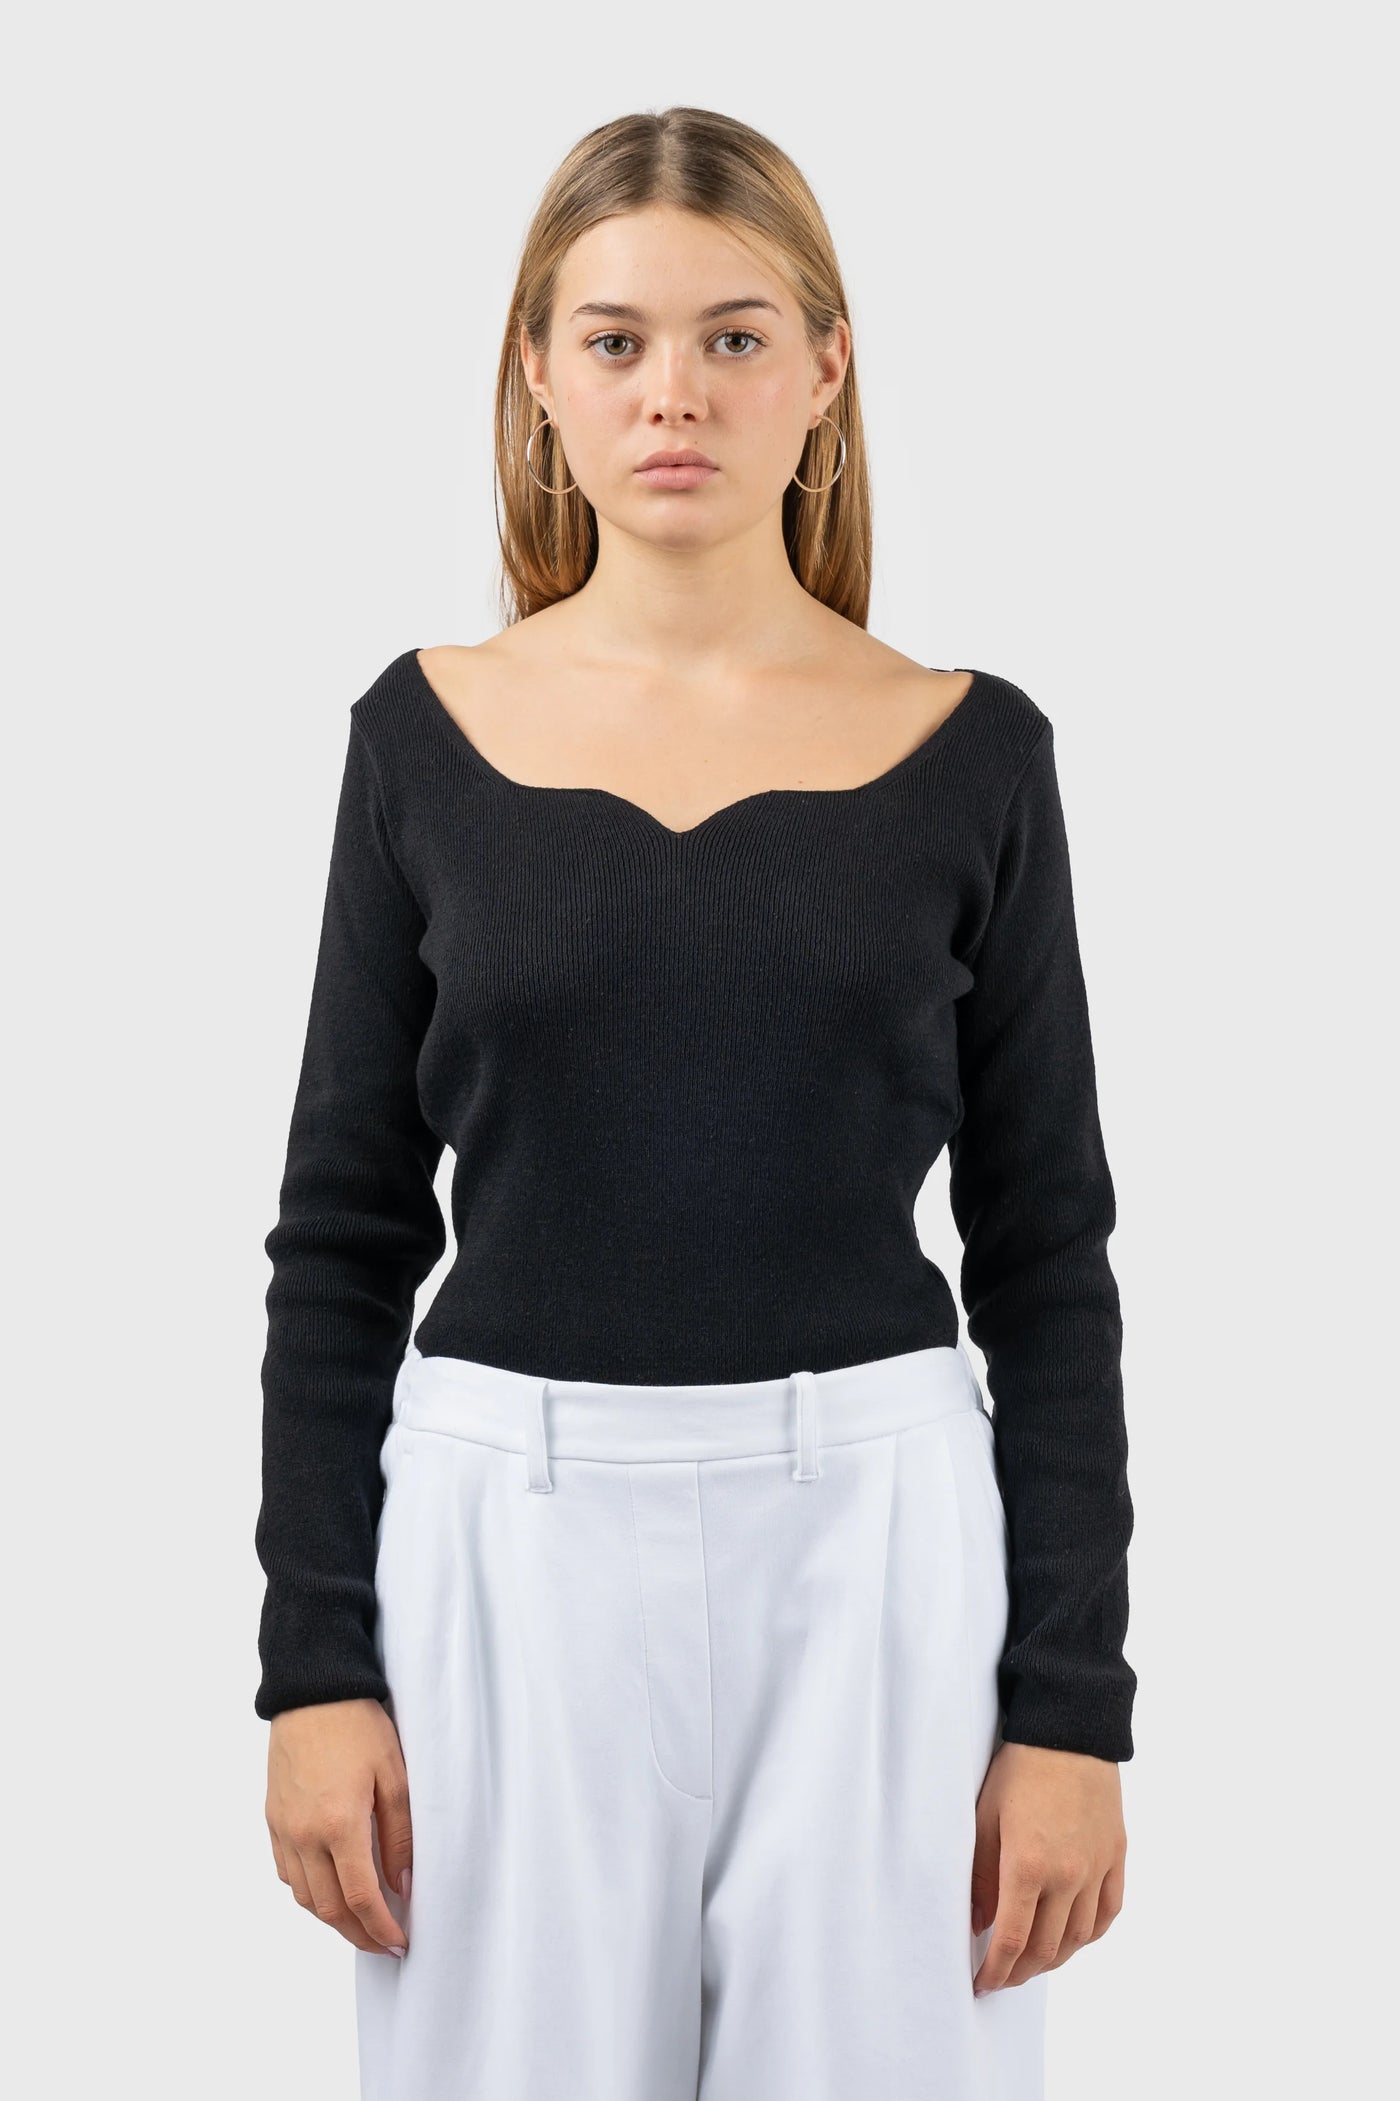 Ribbed Knit Sweetheart Neckline Top